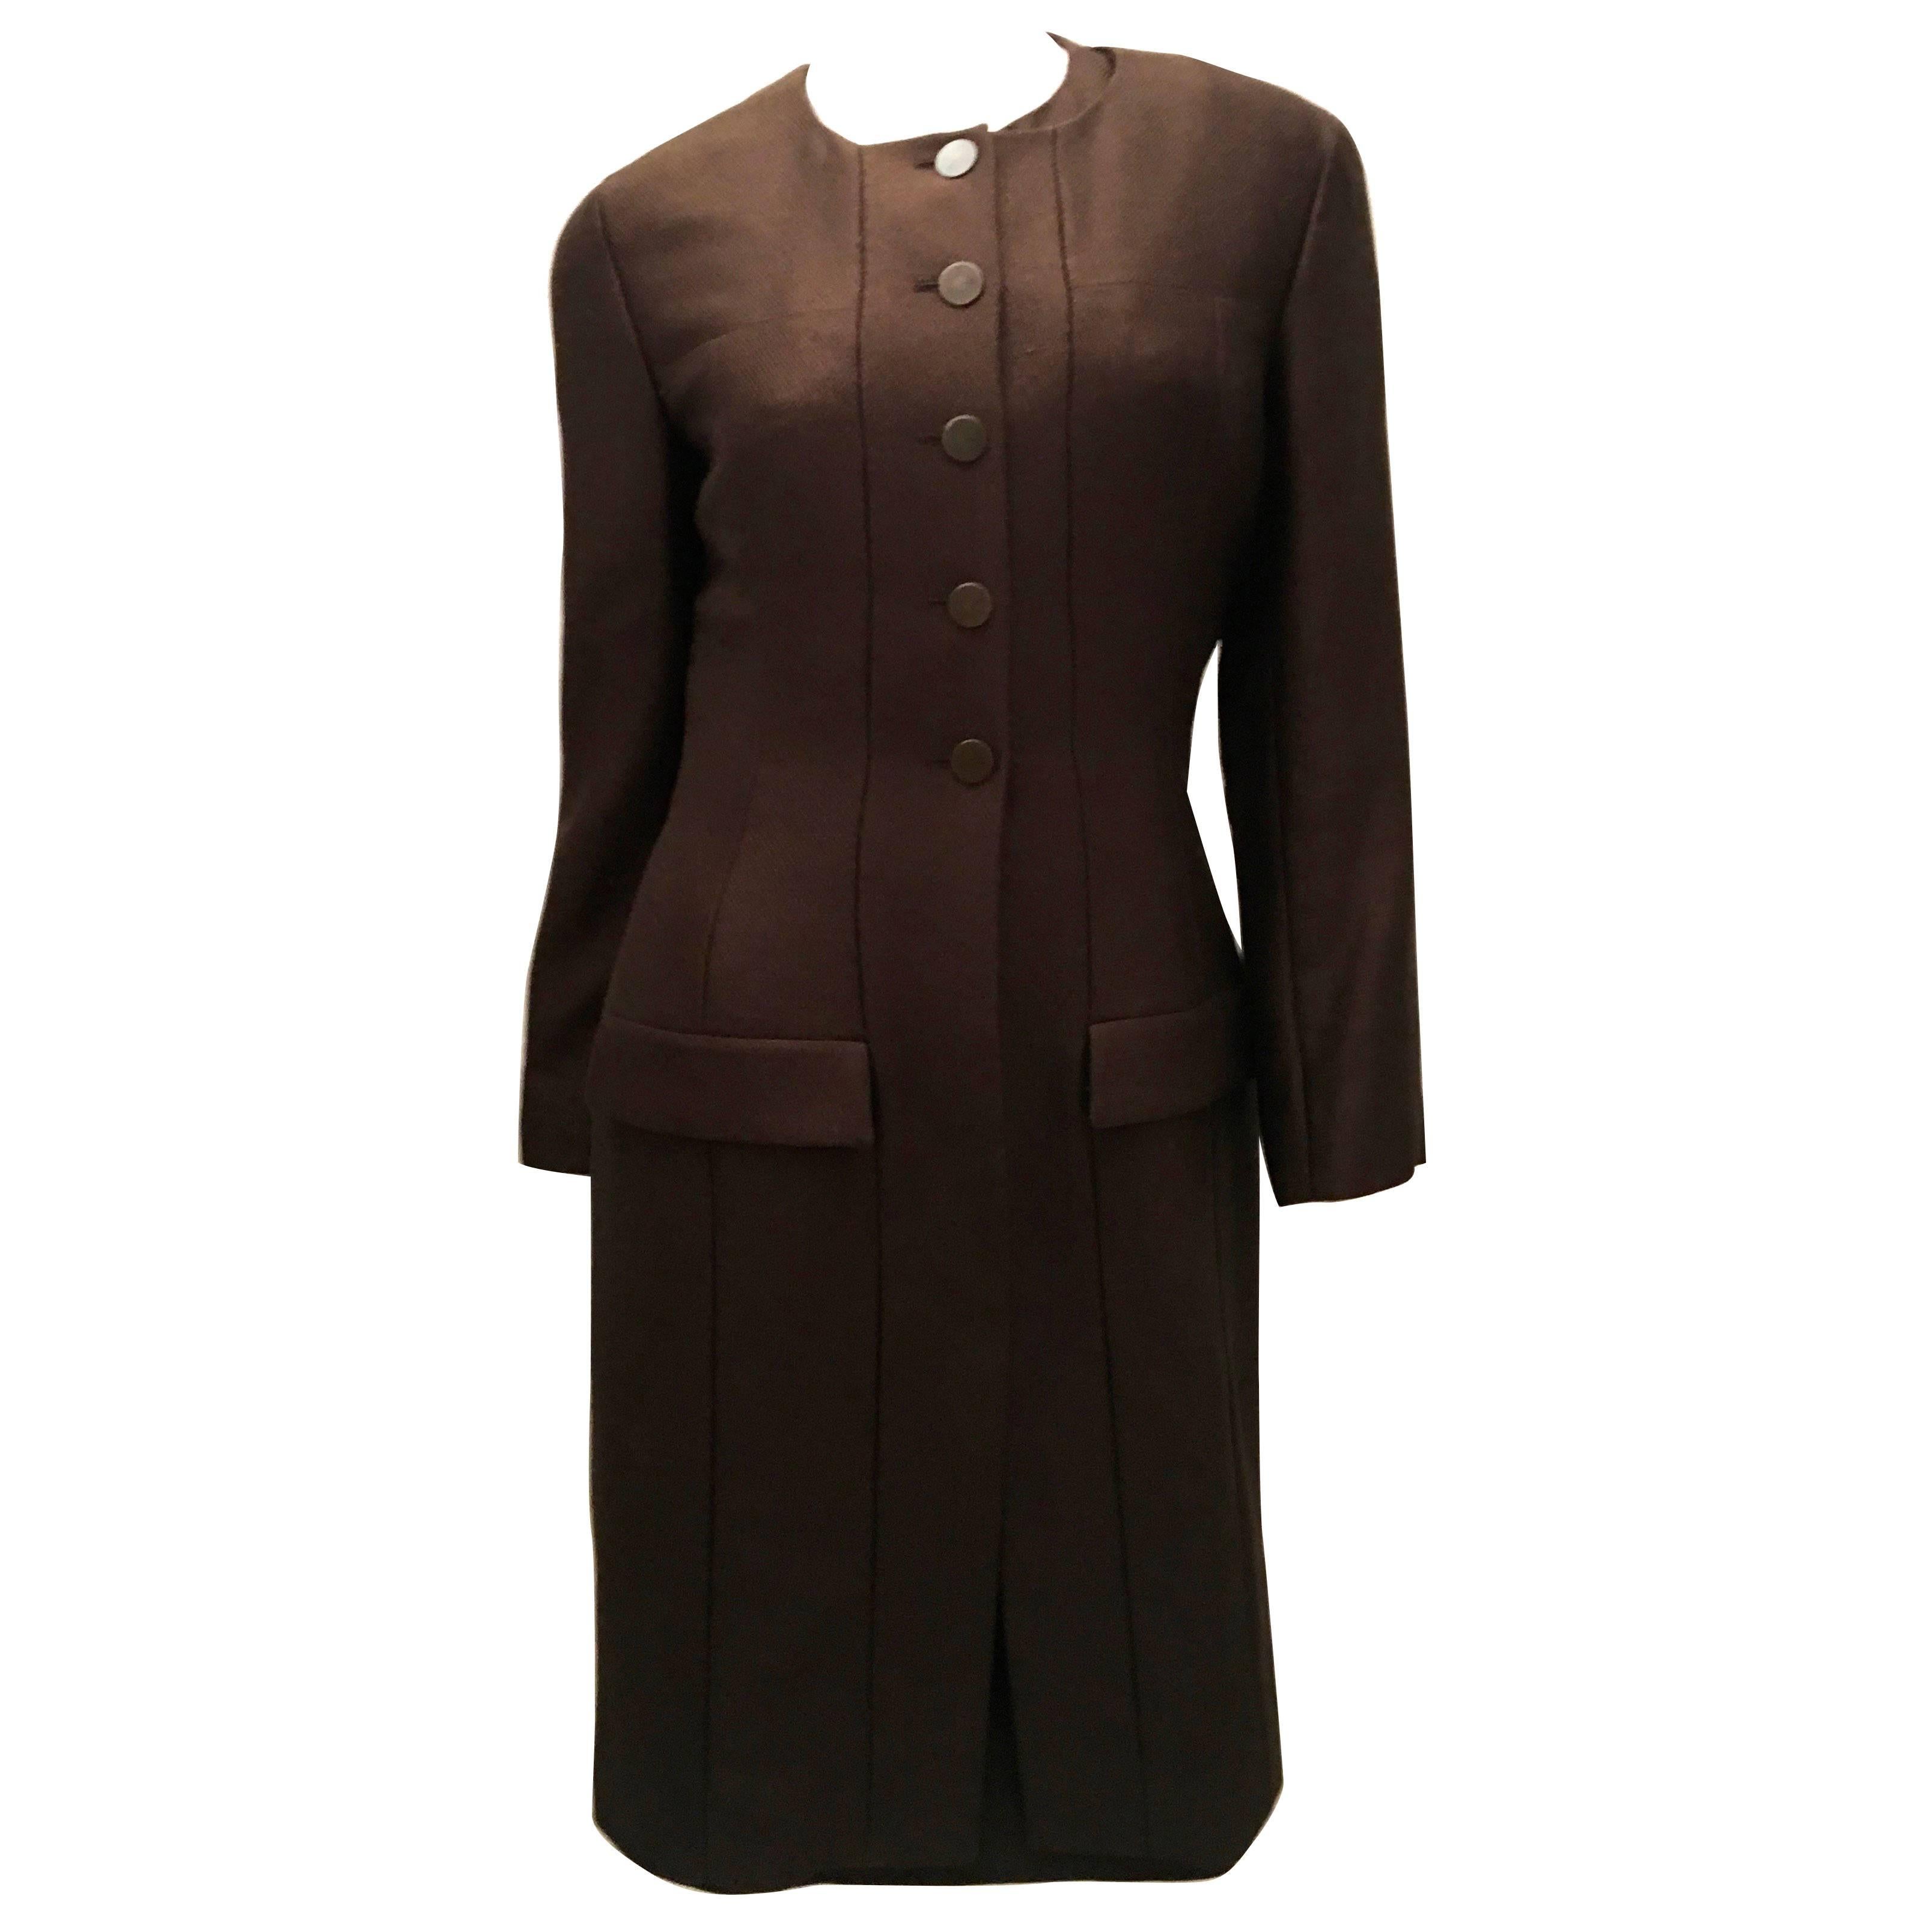 Chanel Coat w/ Matching Dress - Mint Condition - Absolutely Flawless ...